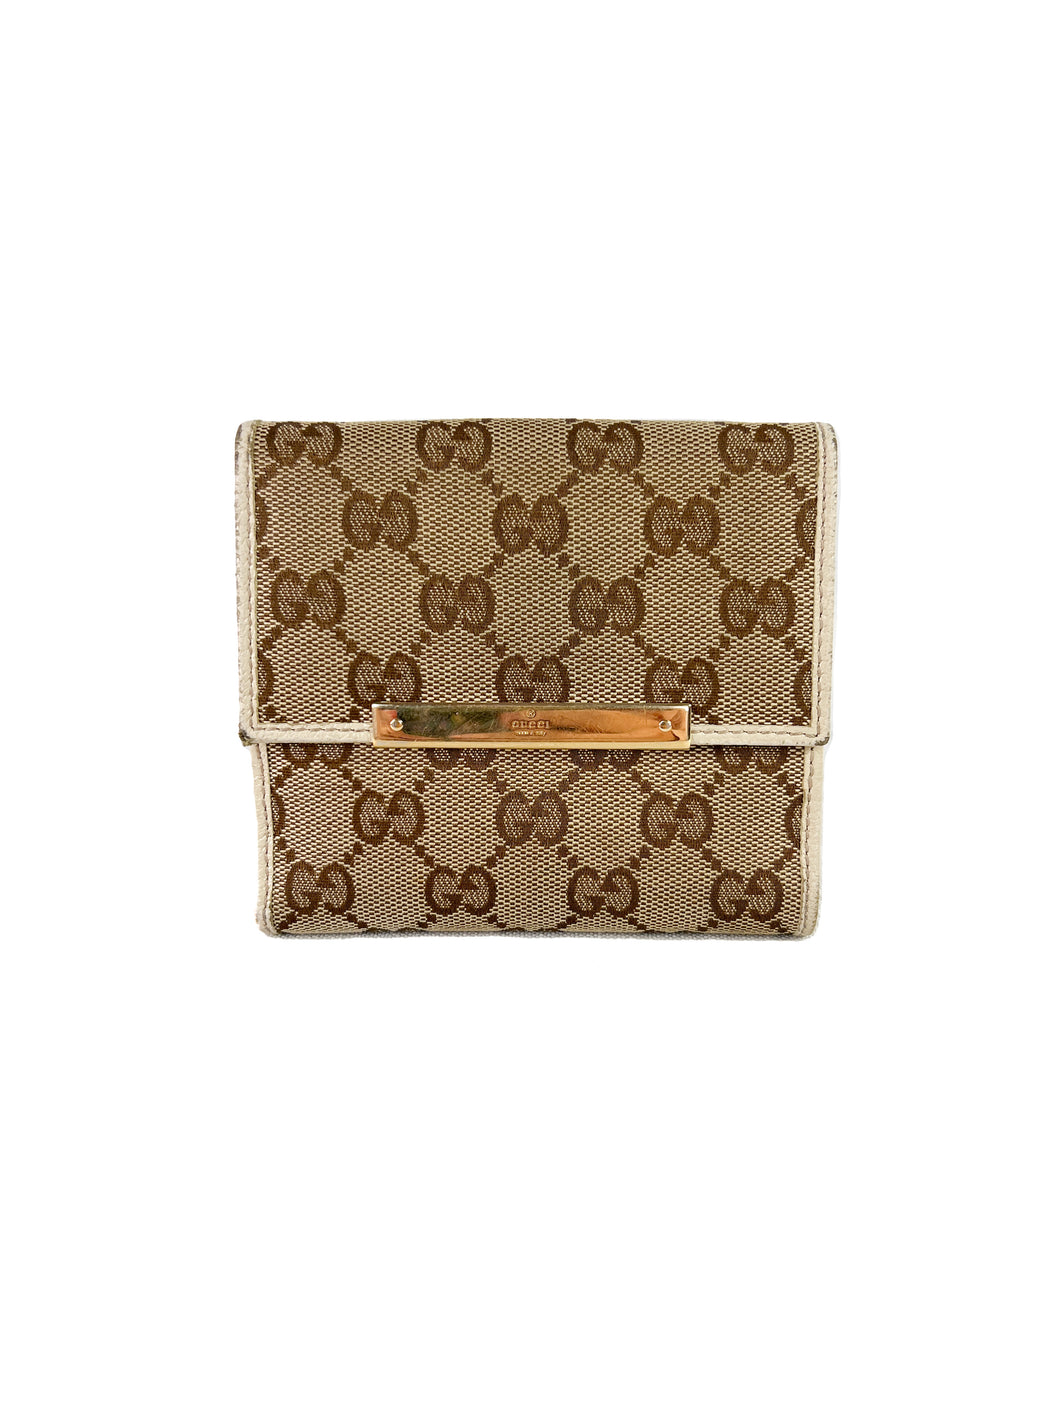 Gucci white & brown signature leather canvas wallet